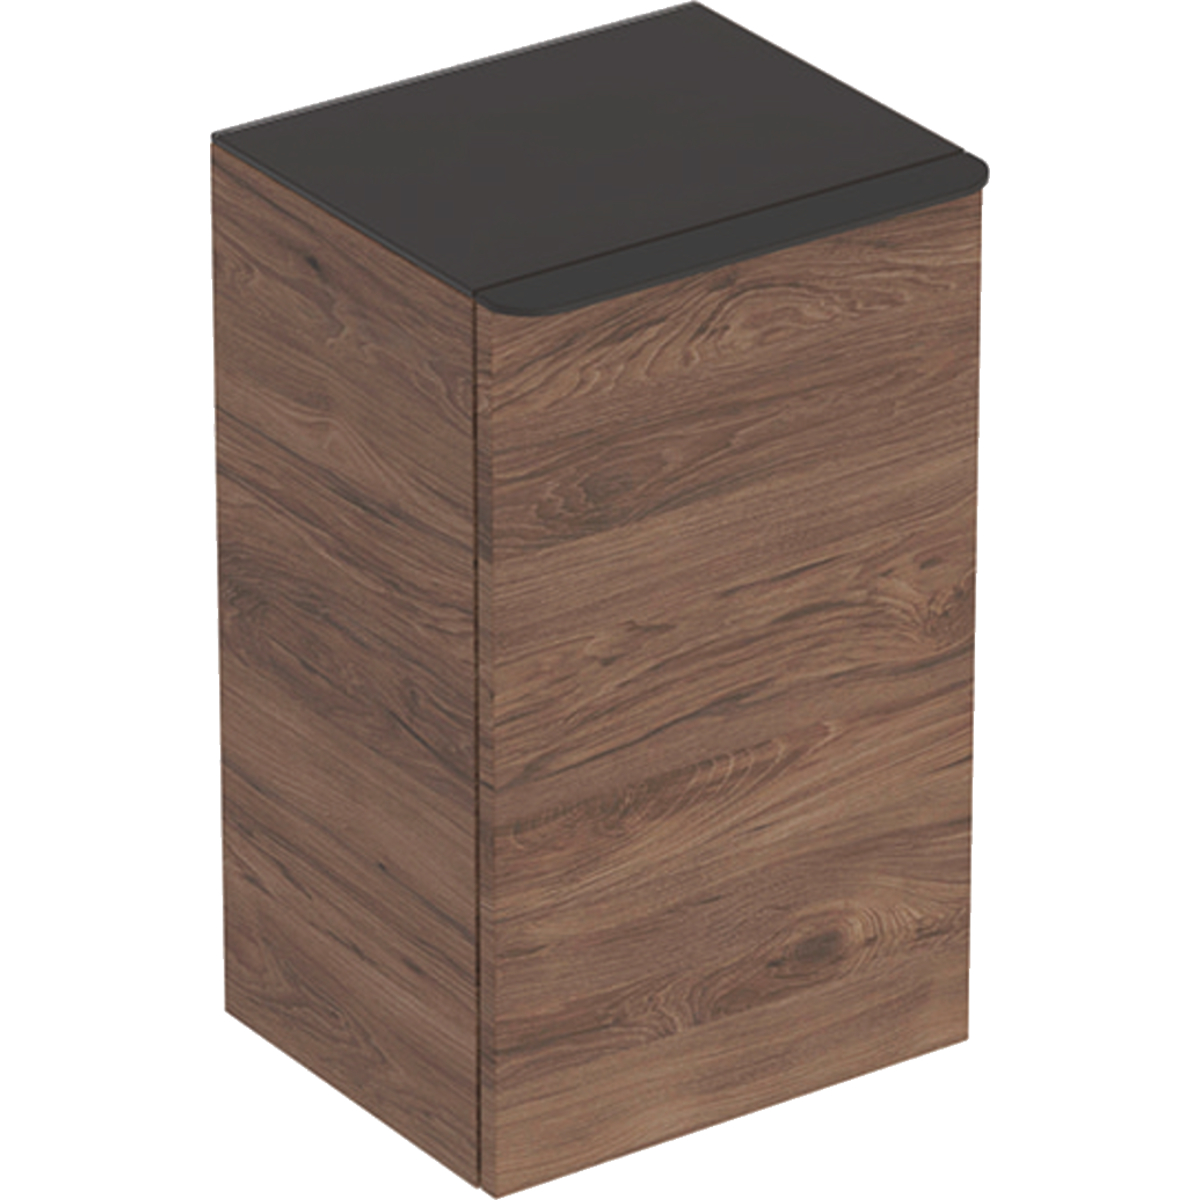 Geberit 500359JR1 Smyle Square Reduced Depth Low Side Unit with Right Door - Hickory